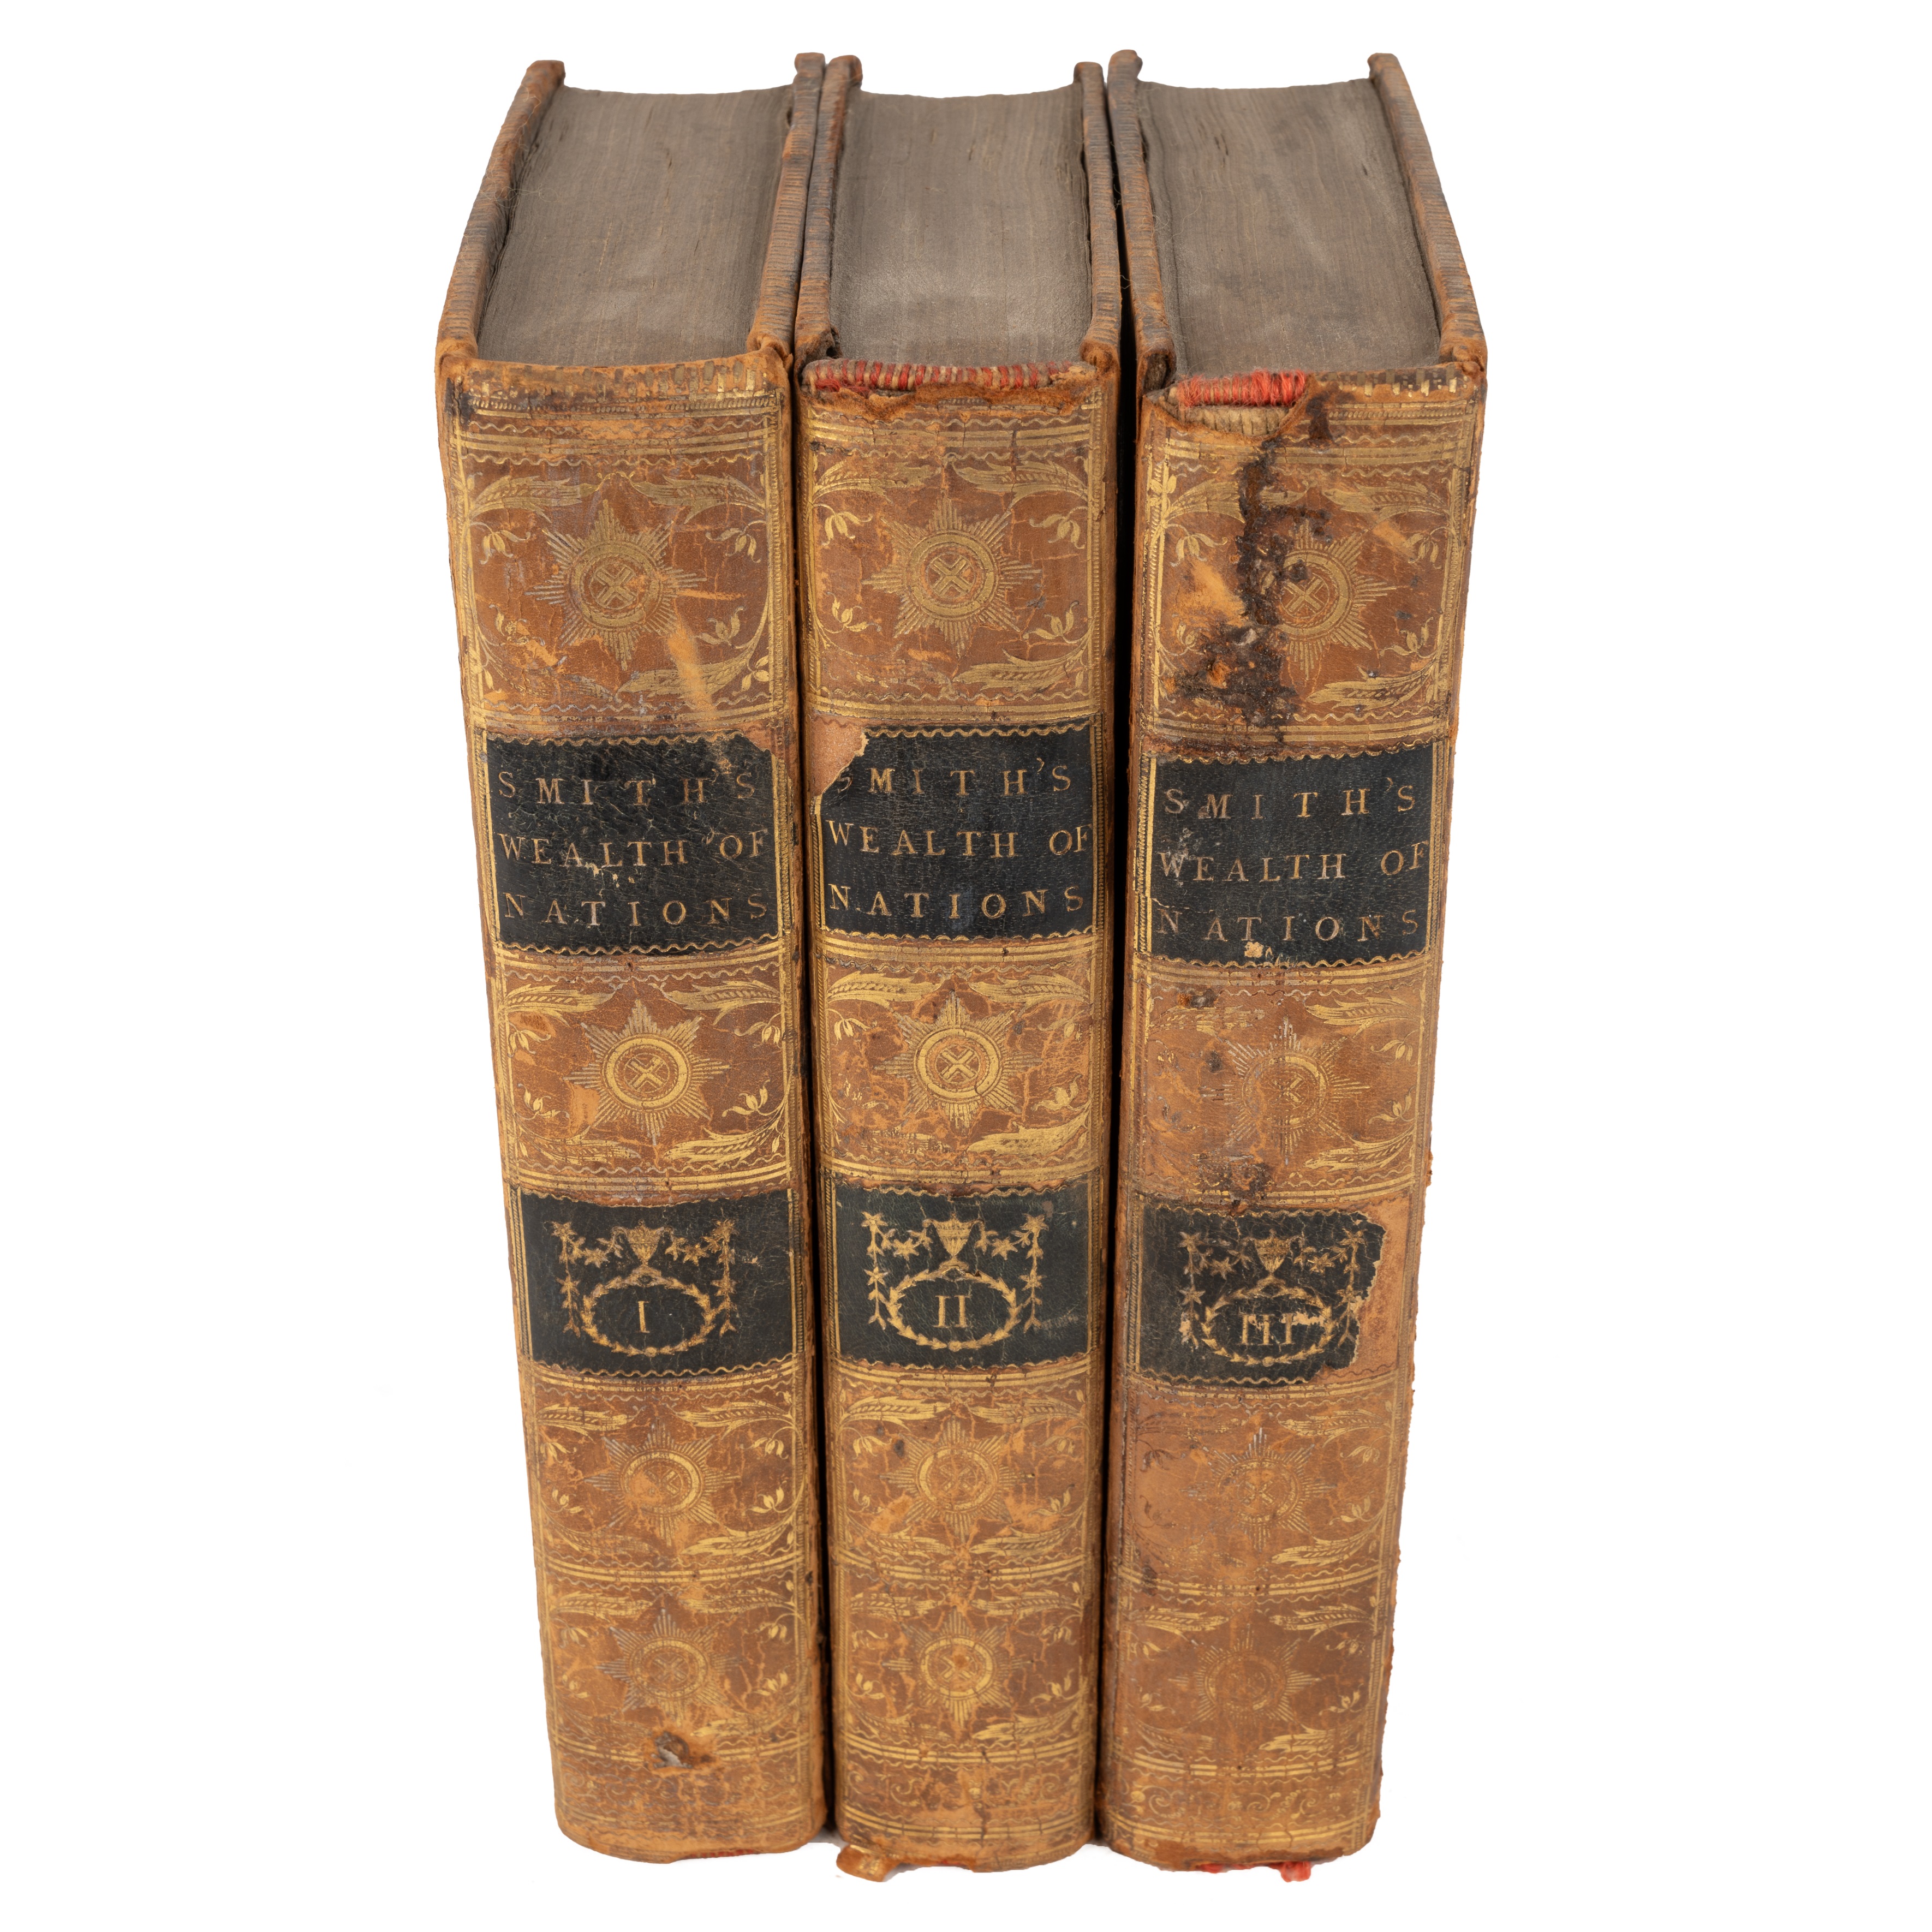 Smith (Adam) 'An Inquiry into the Nature and Causes of the Wealth of Nations' 3 vols. 6th Ed. - Image 2 of 7